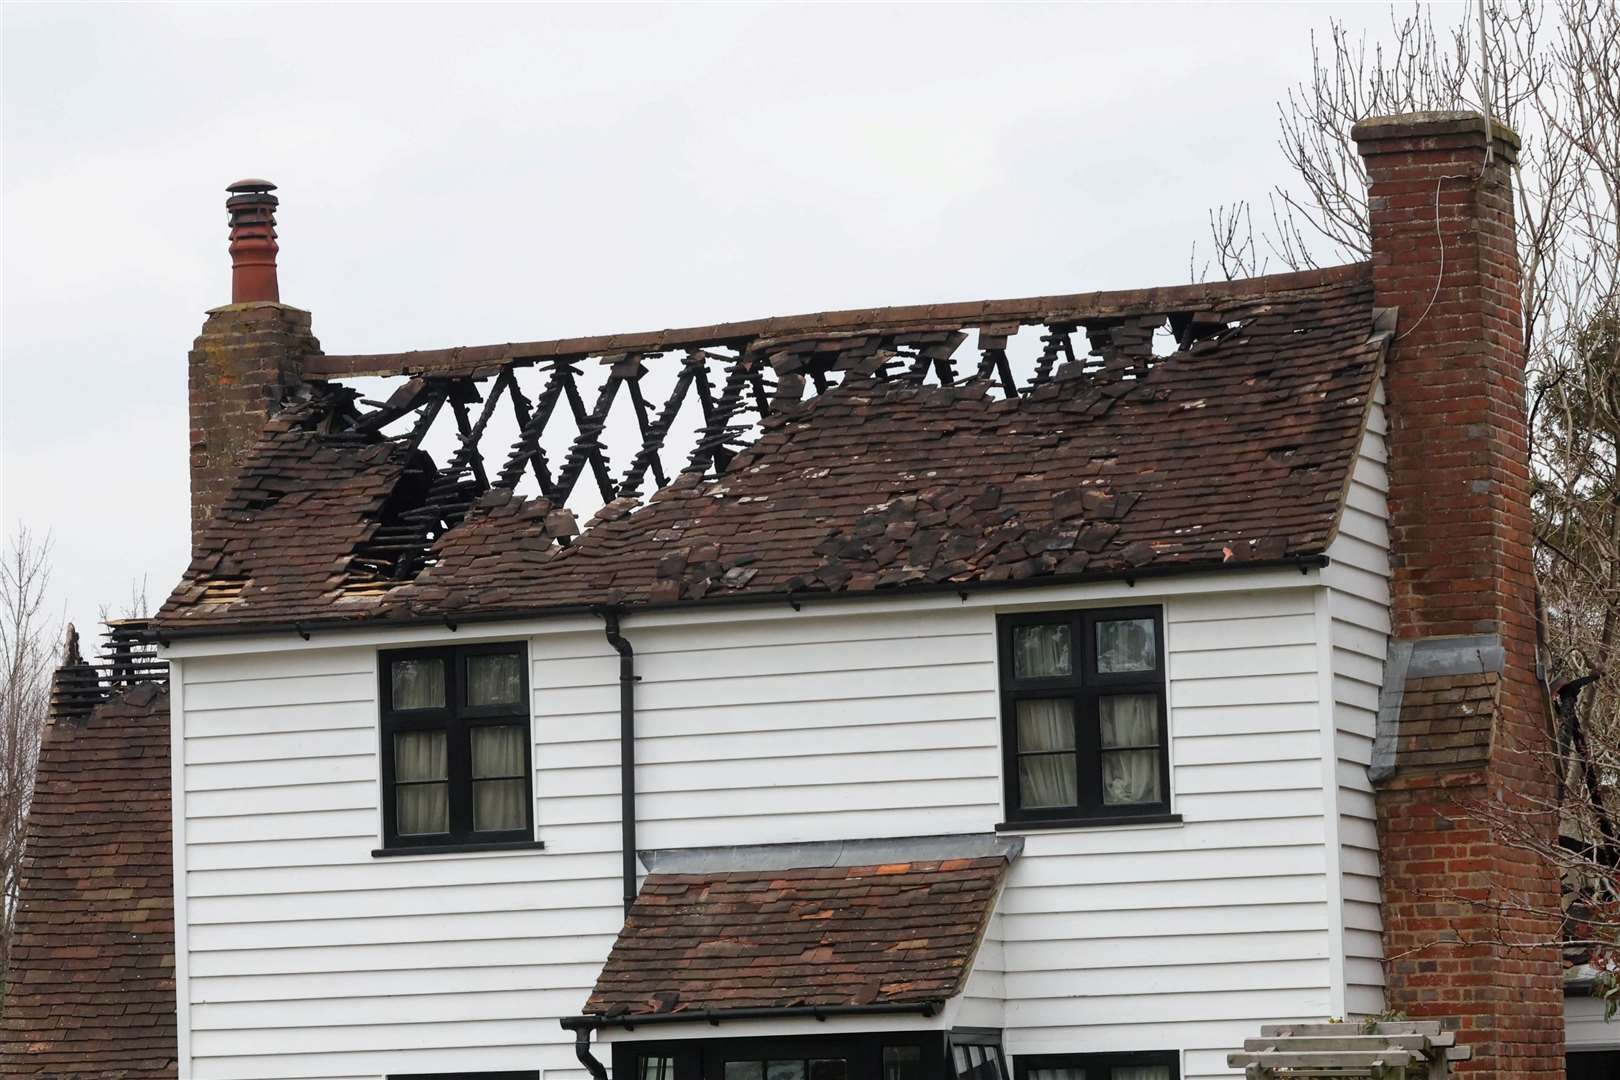 The damage caused by the fire in West Malling. Picture: UKNIP (62790769)